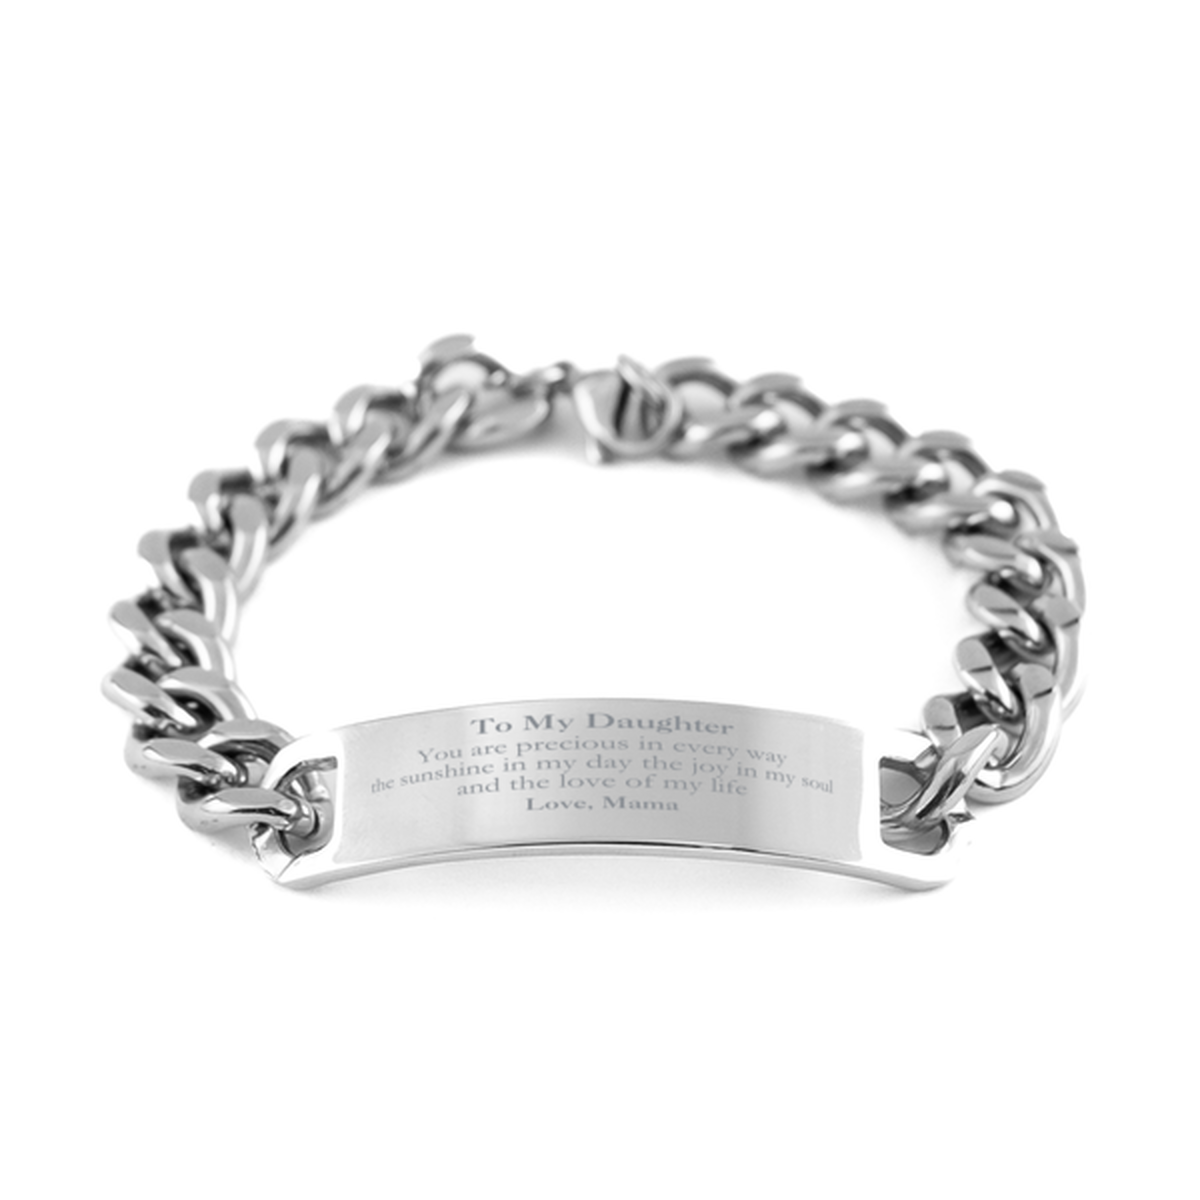 Graduation Gifts for Daughter Cuban Chain Stainless Steel Bracelet Present from Mama, Christmas Daughter Birthday Gifts Daughter You are precious in every way the sunshine in my day. Love, Mama